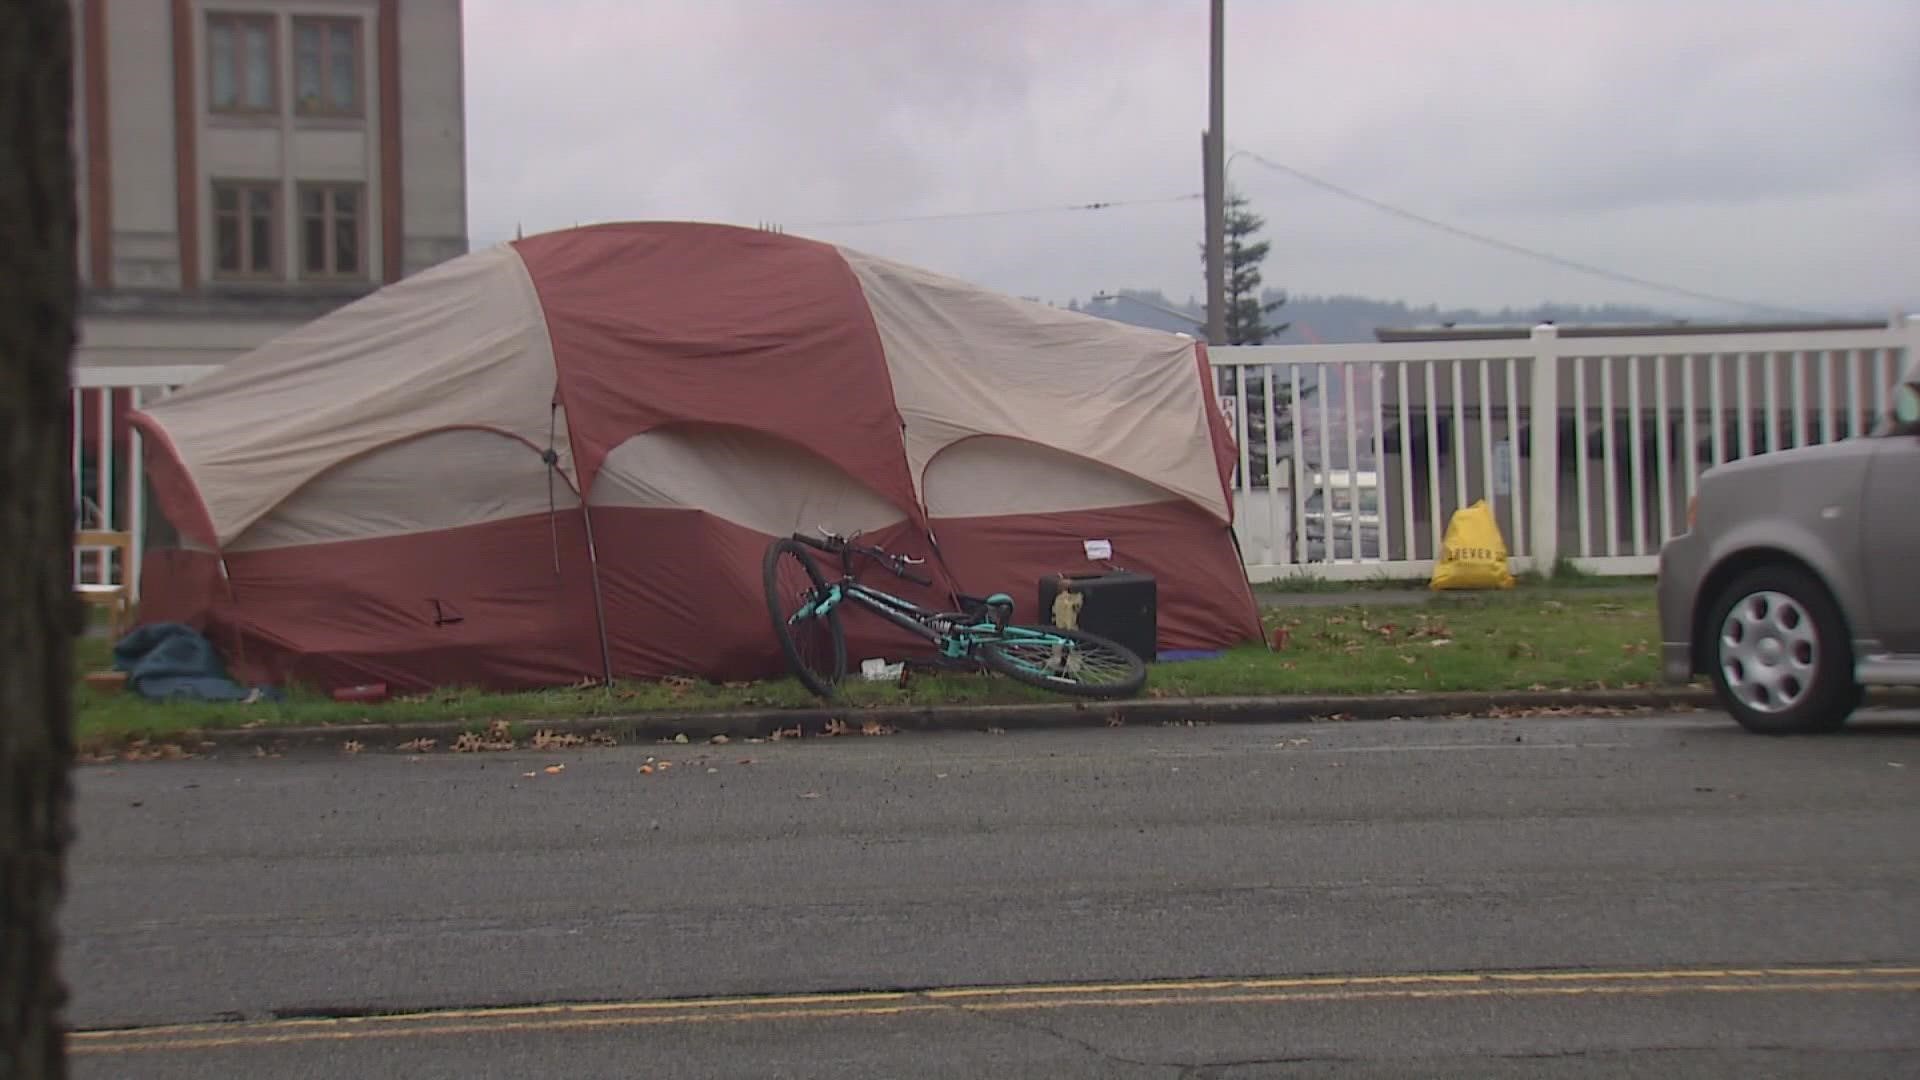 The city council will vote on resolutions to use the funds to address homeless encampments on WSDOT property within the SR 167/SR 509 Gateway Project.